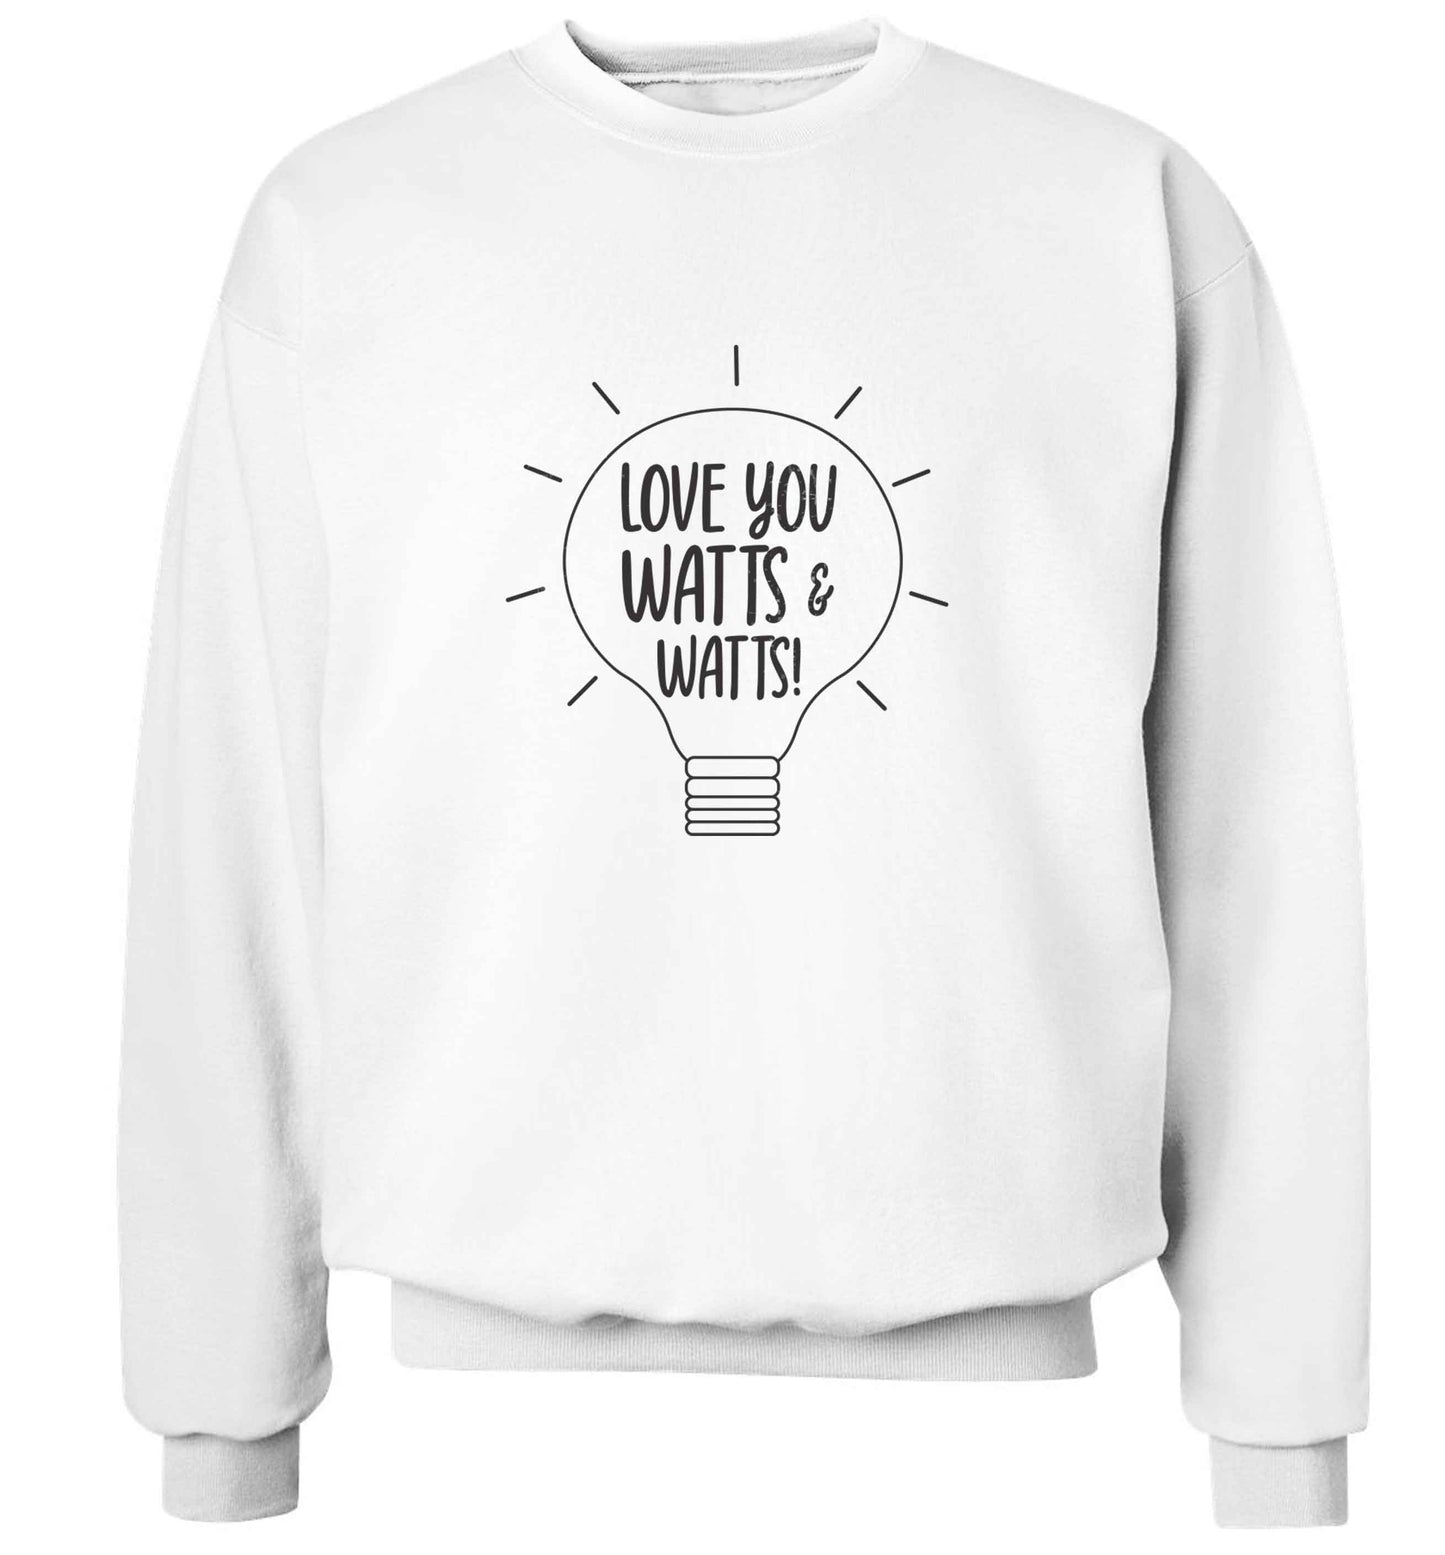 I love you watts and watts adult's unisex white sweater 2XL